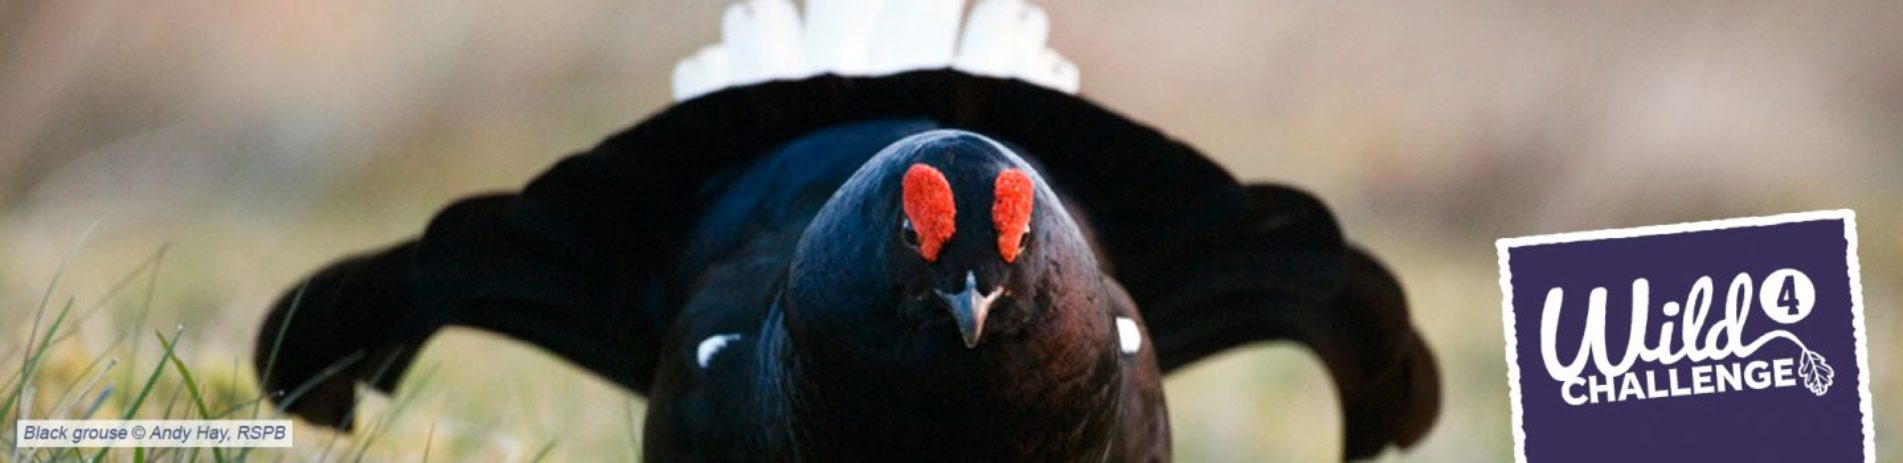 close-up-of-black-grouse-opening-its-wings-with-text-in-corner-reading-wild-challenge-four